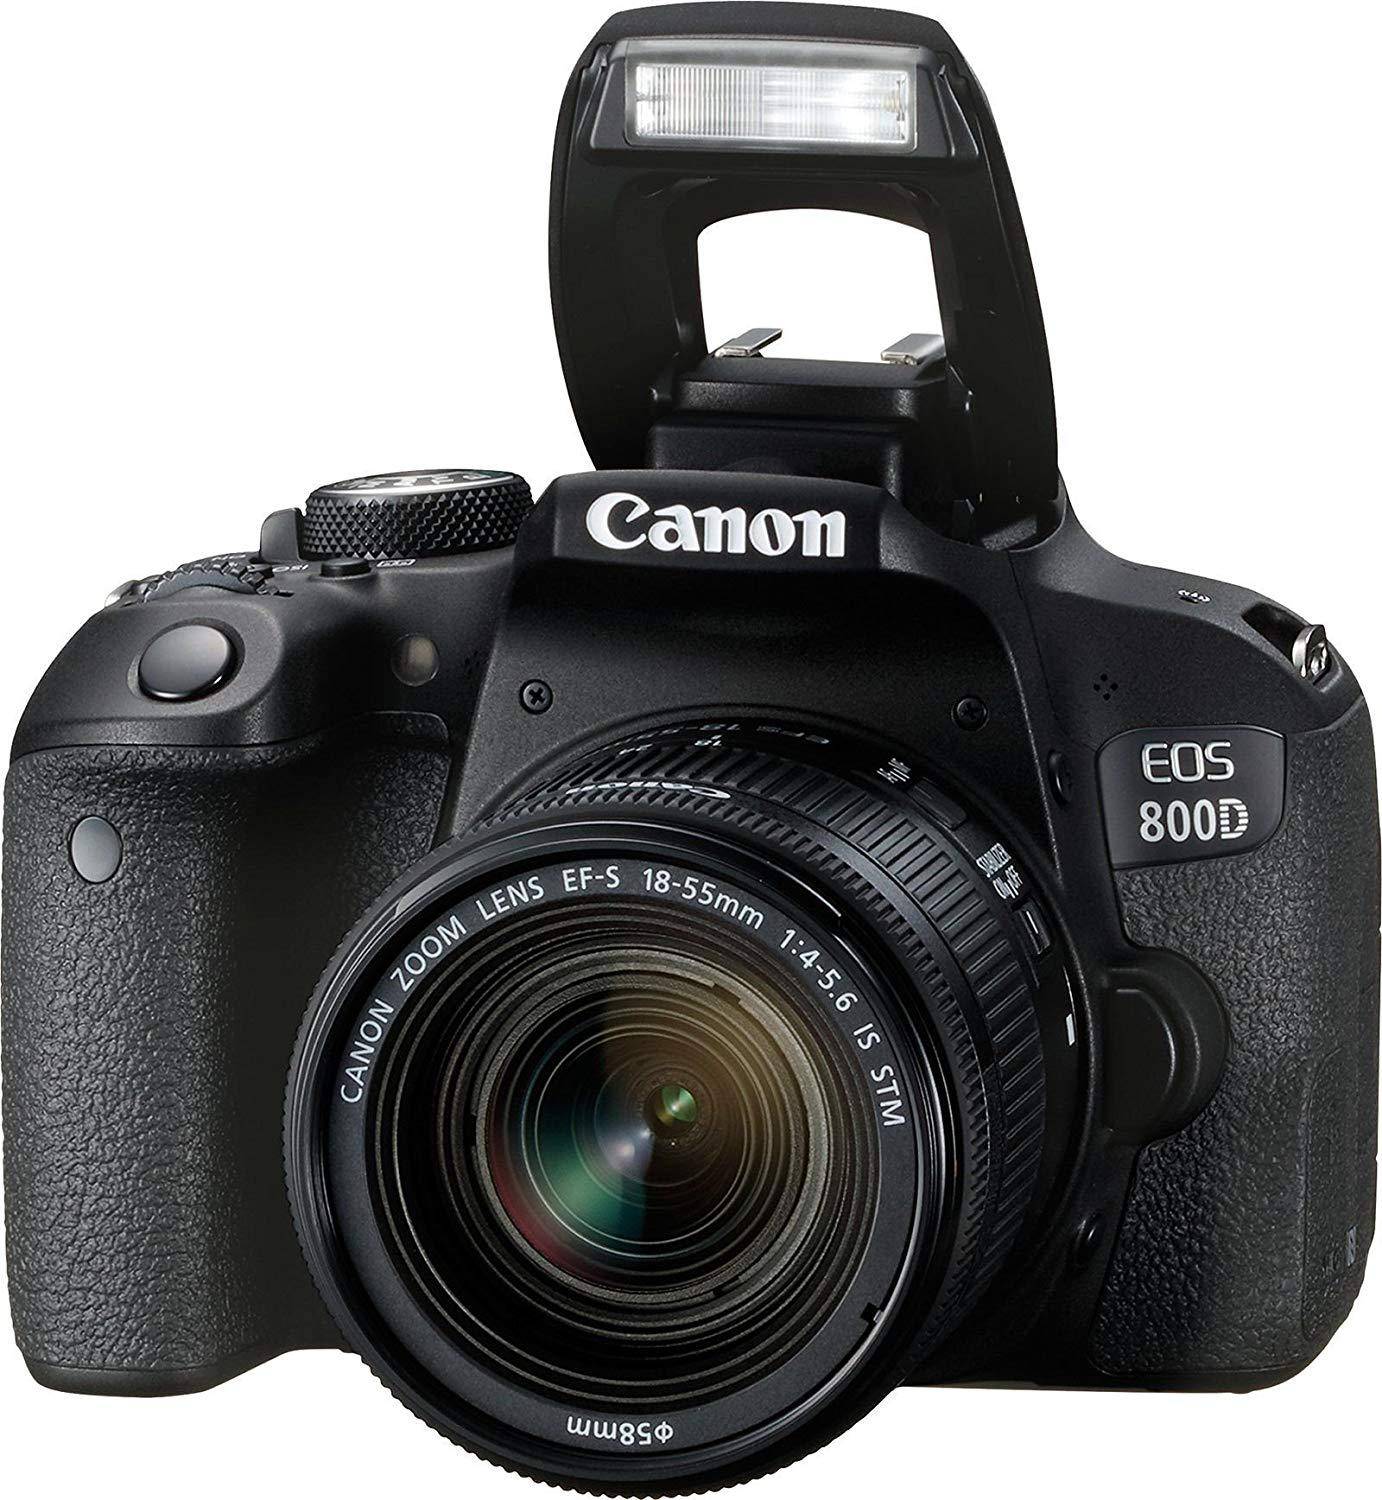 Buy Canon EOS 800D DSLR cameras Online in India at Lowest Price | VPLAK